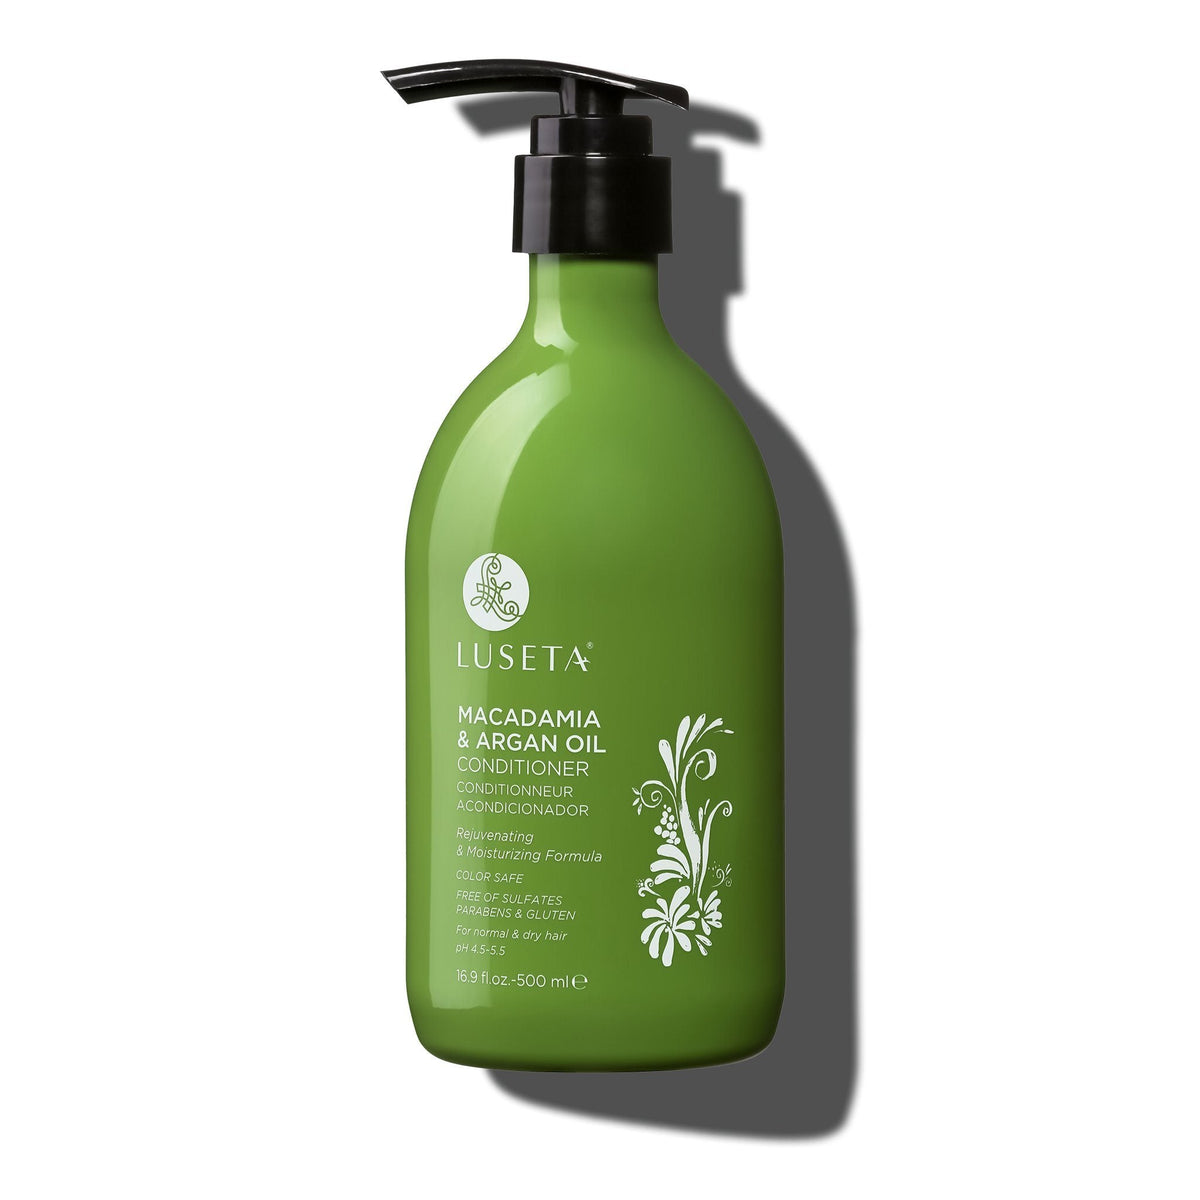 Macadamia & Argan Oil Conditioner - 16.9oz - by Luseta Beauty |ProCare Outlet|